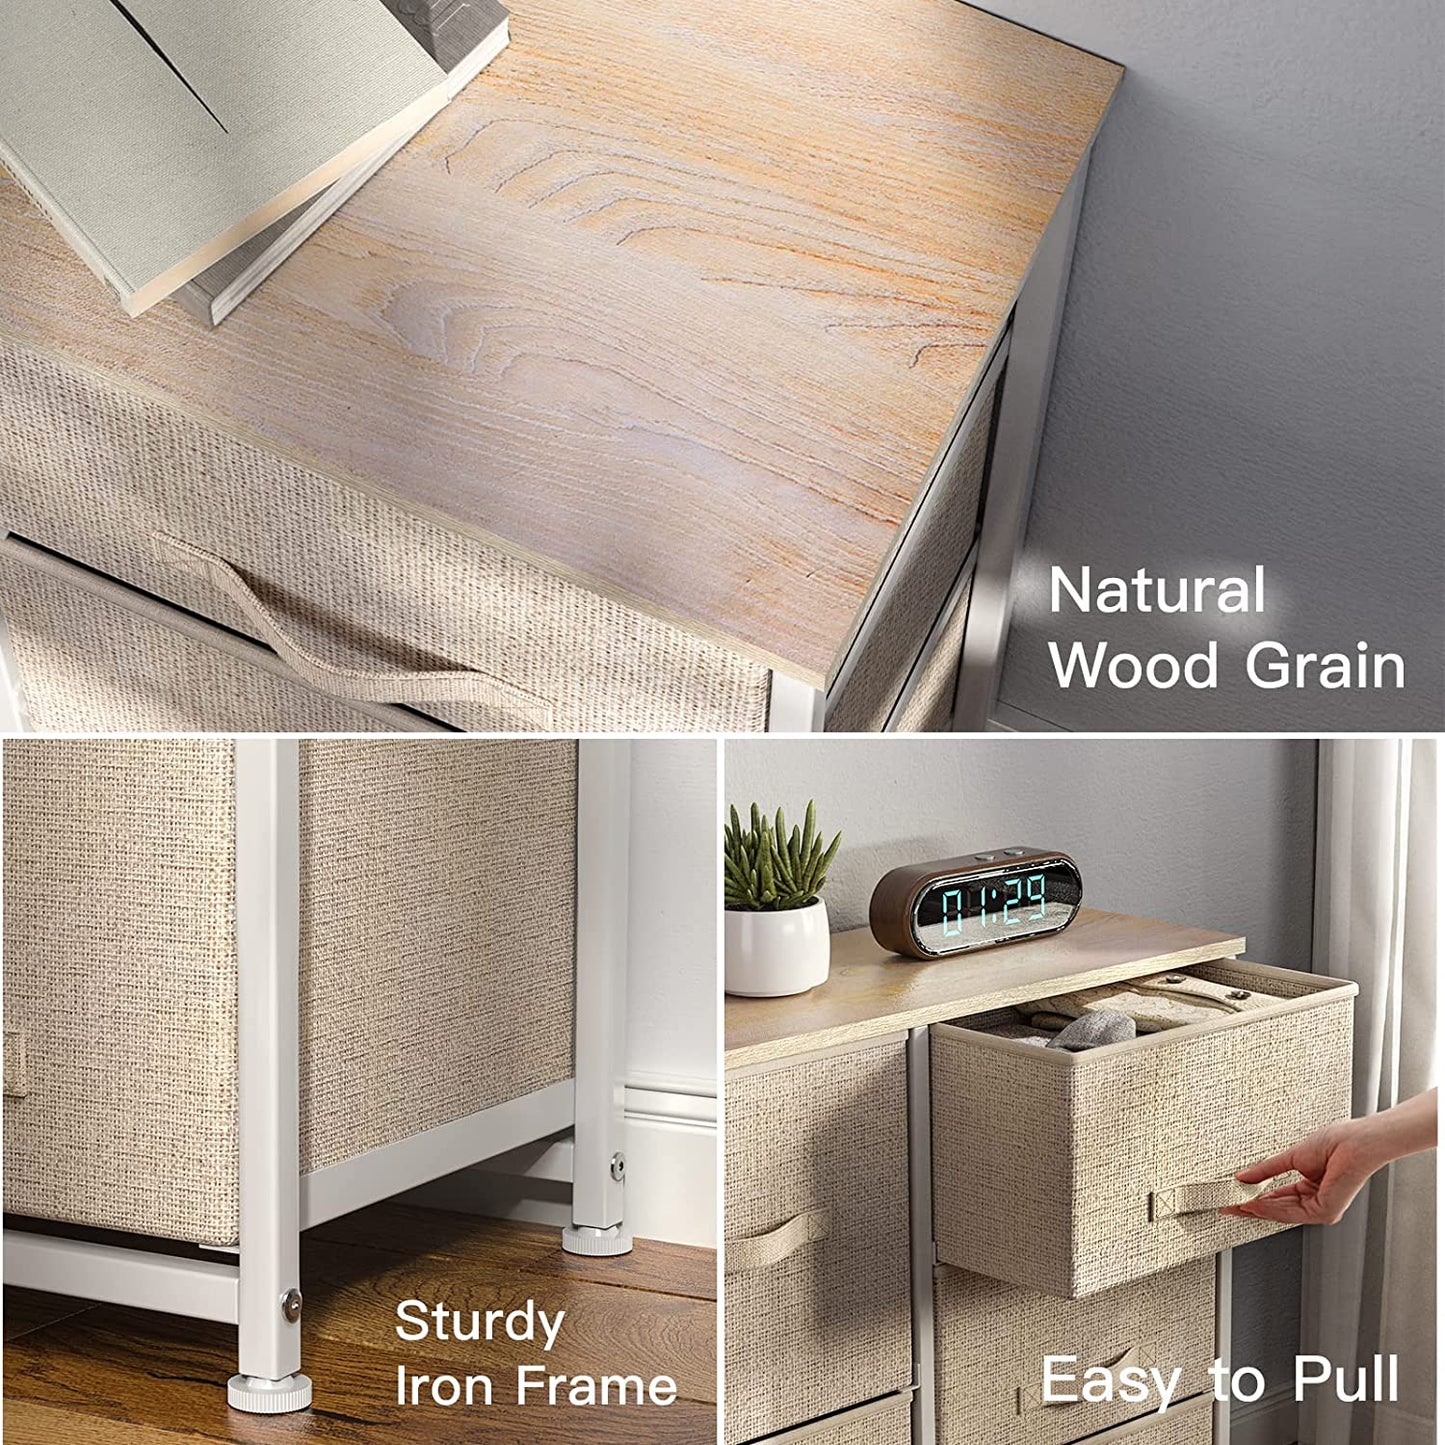 Chest of Drawers, Fabric Storage Drawers with Wood Top and Large Storage Space, Easy to Install Room Organizer, Vertical Chest of 5 Drawers Bedroom, Living Room, Nursery Room, Hallway, Etc